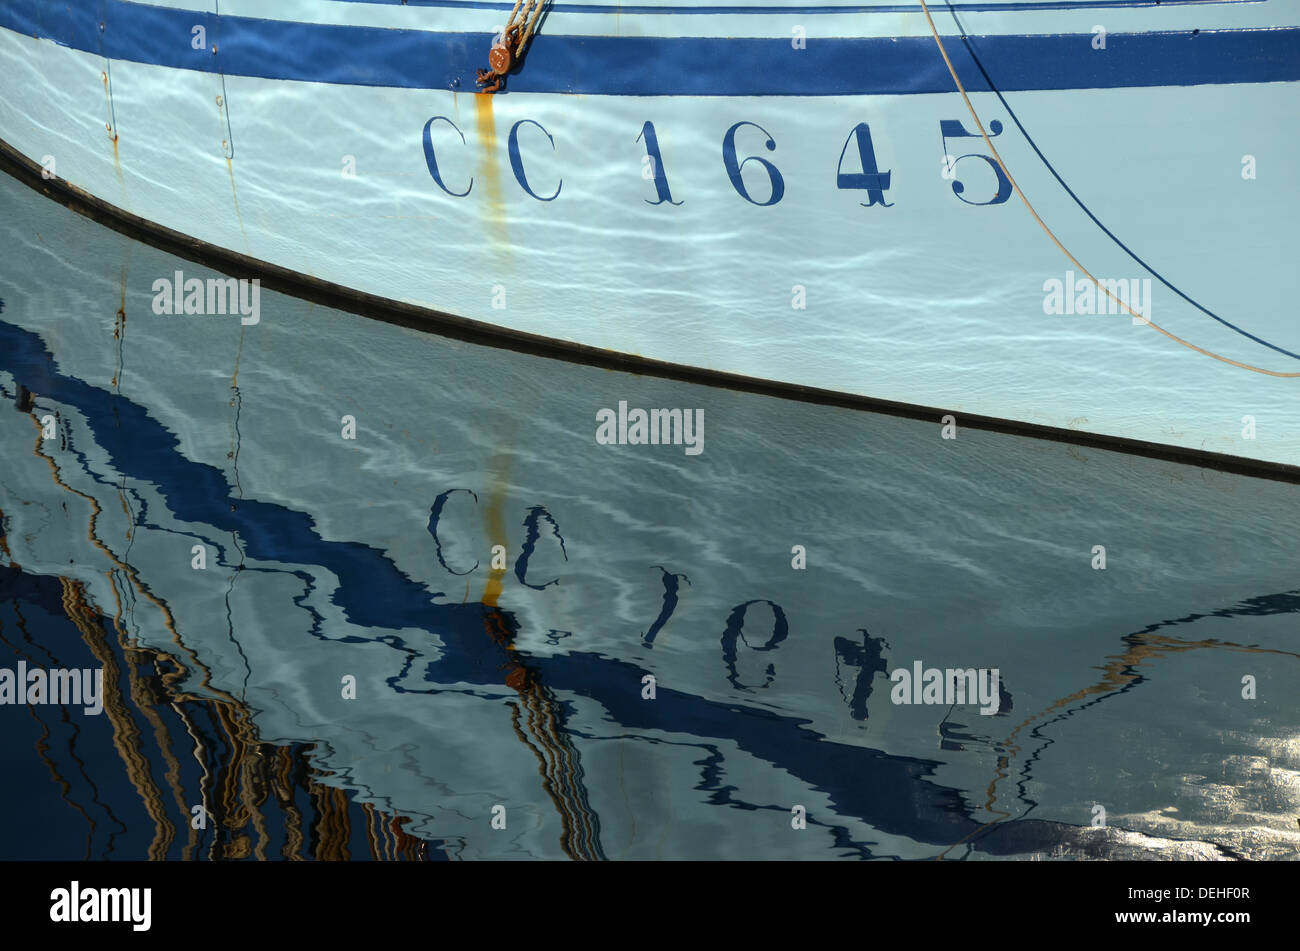 Blue boat reflection on water in the harbour of Concarneau, Brittany, France. Stock Photo